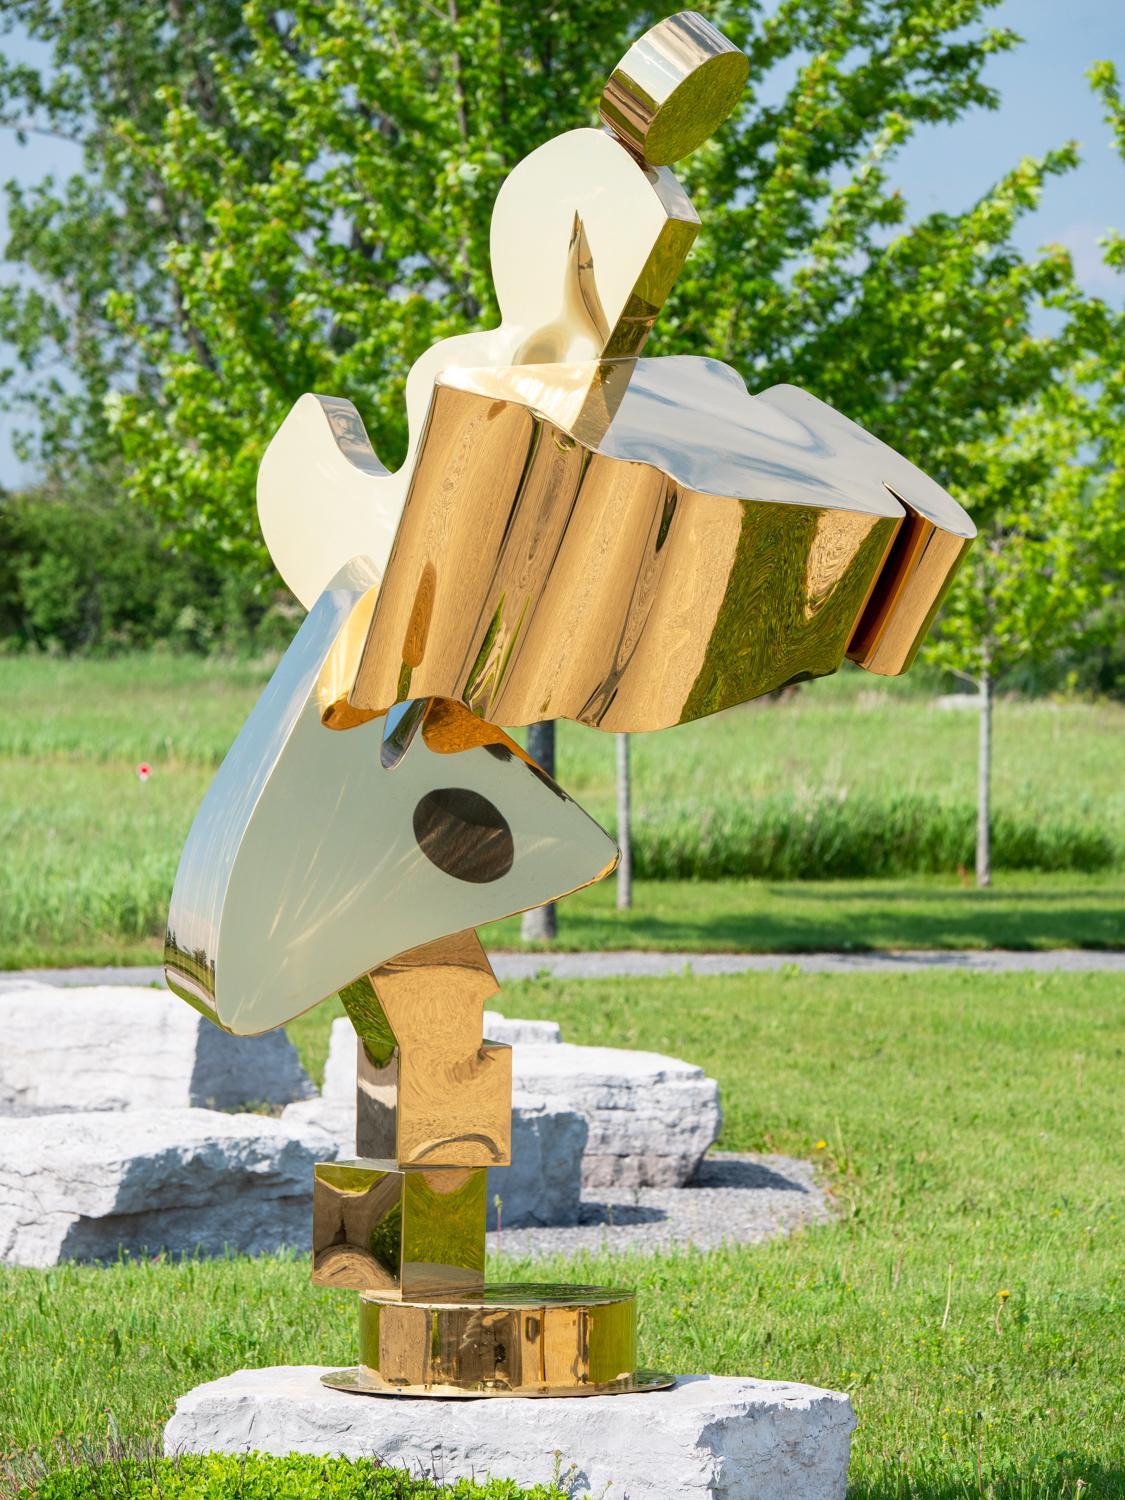 Celestial - tall, post-pop, abstract, gold plated steel, outdoor sculpture - Sculpture by Viktor Mitic